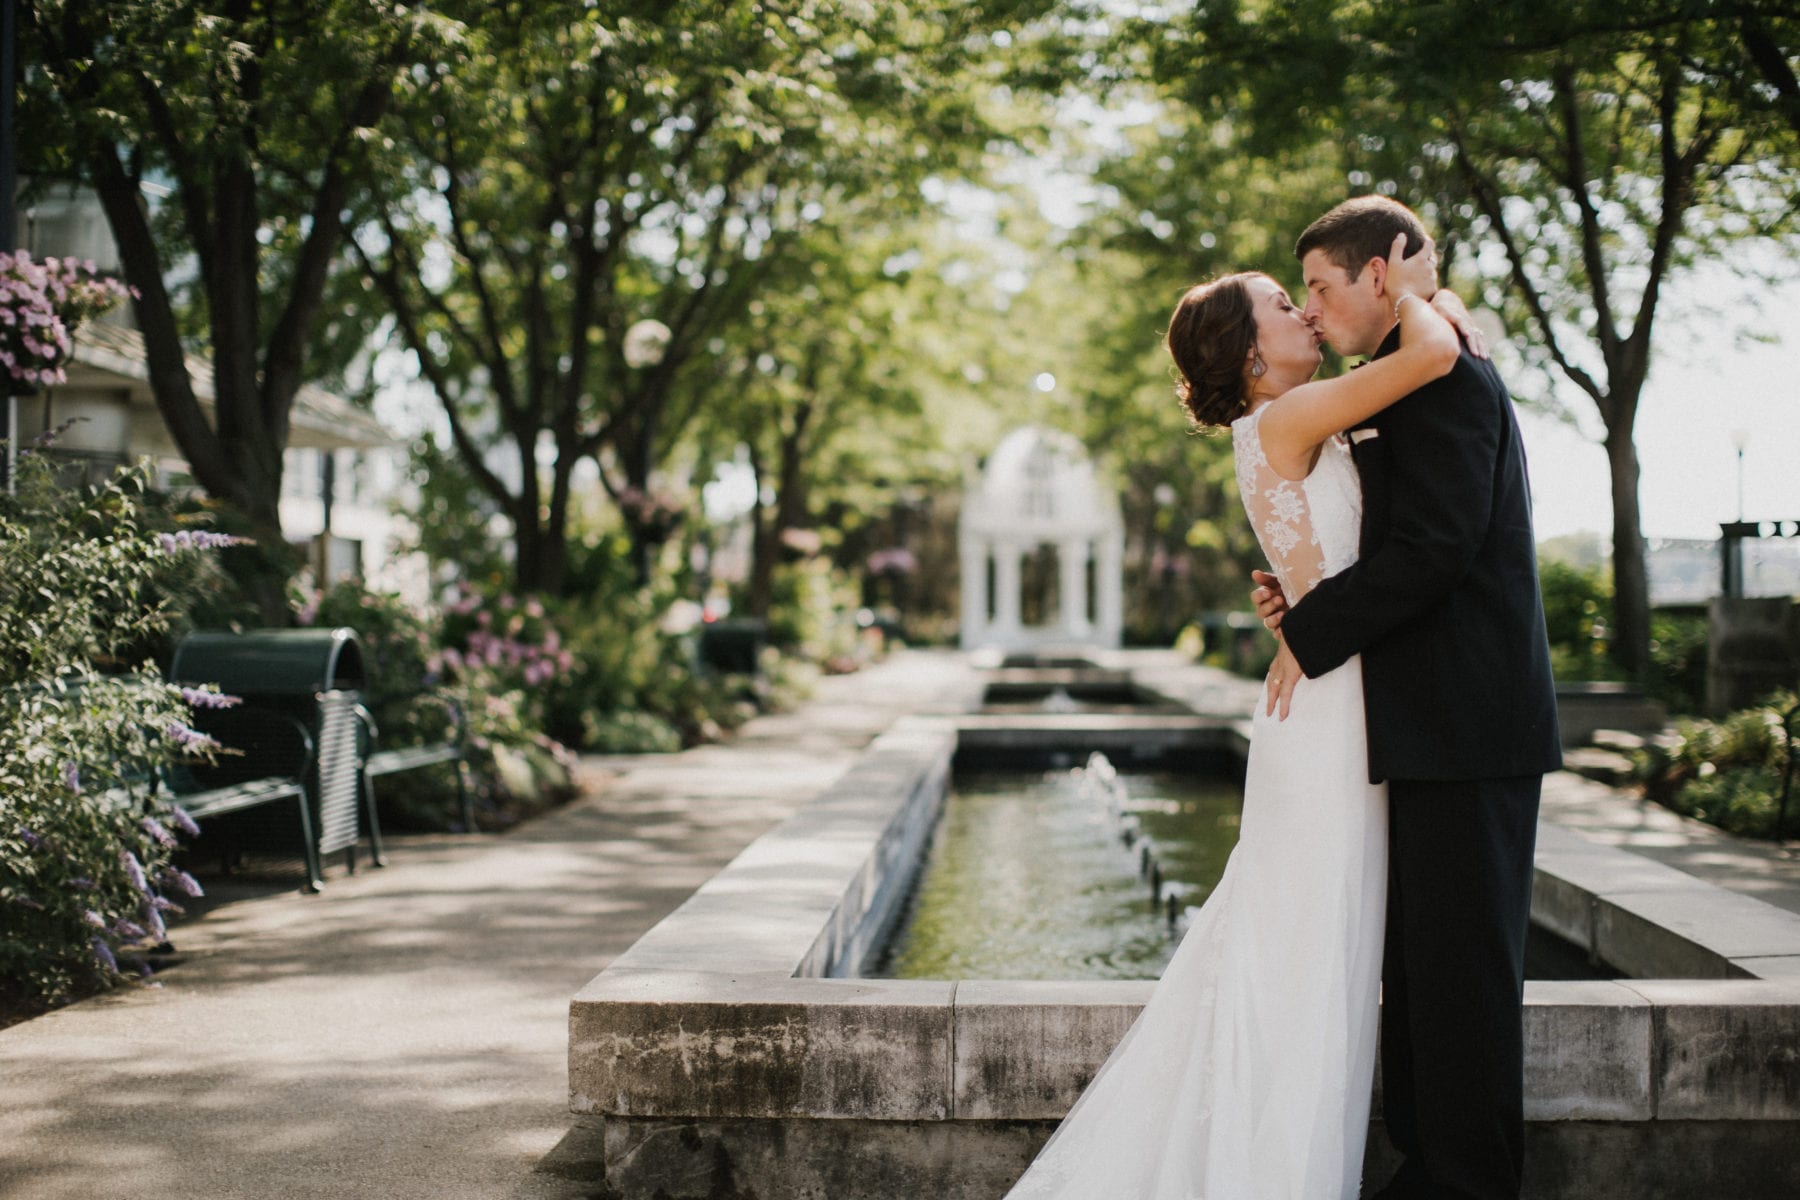 bride and groom kiss in front of fountain The Carrs Photography is an editorial wedding & portrait photography studio specializing in documenting fine weddings and storytelling portraits in Dayton Ohio, Chicago and Worldwide